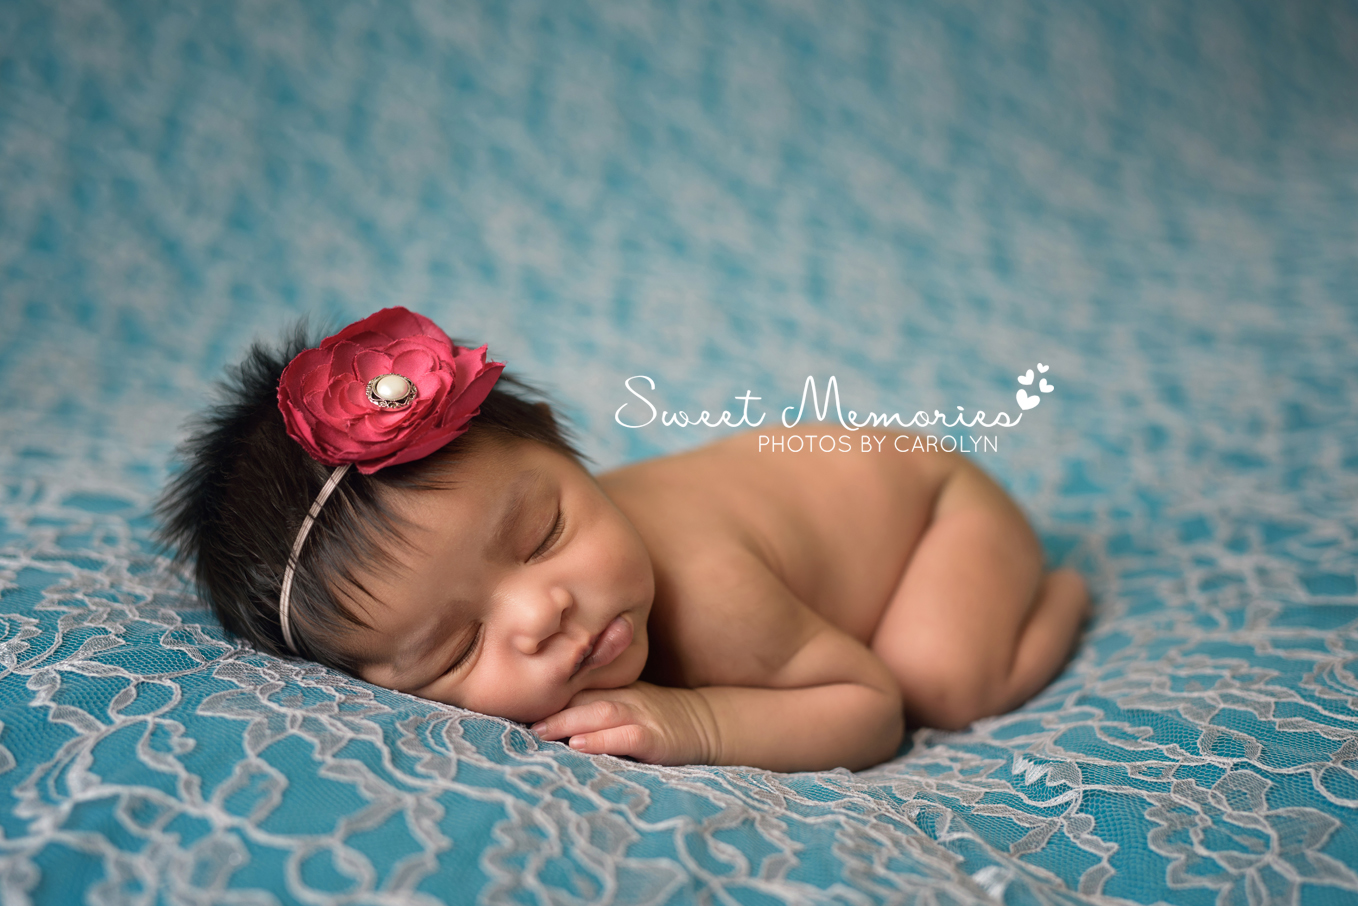 Sweet Memories Photos by Carolyn | Newtown PA | Bucks County Montgomery County Newborn Infant Baby Photographer | Indian newborn baby girl | teal and pink